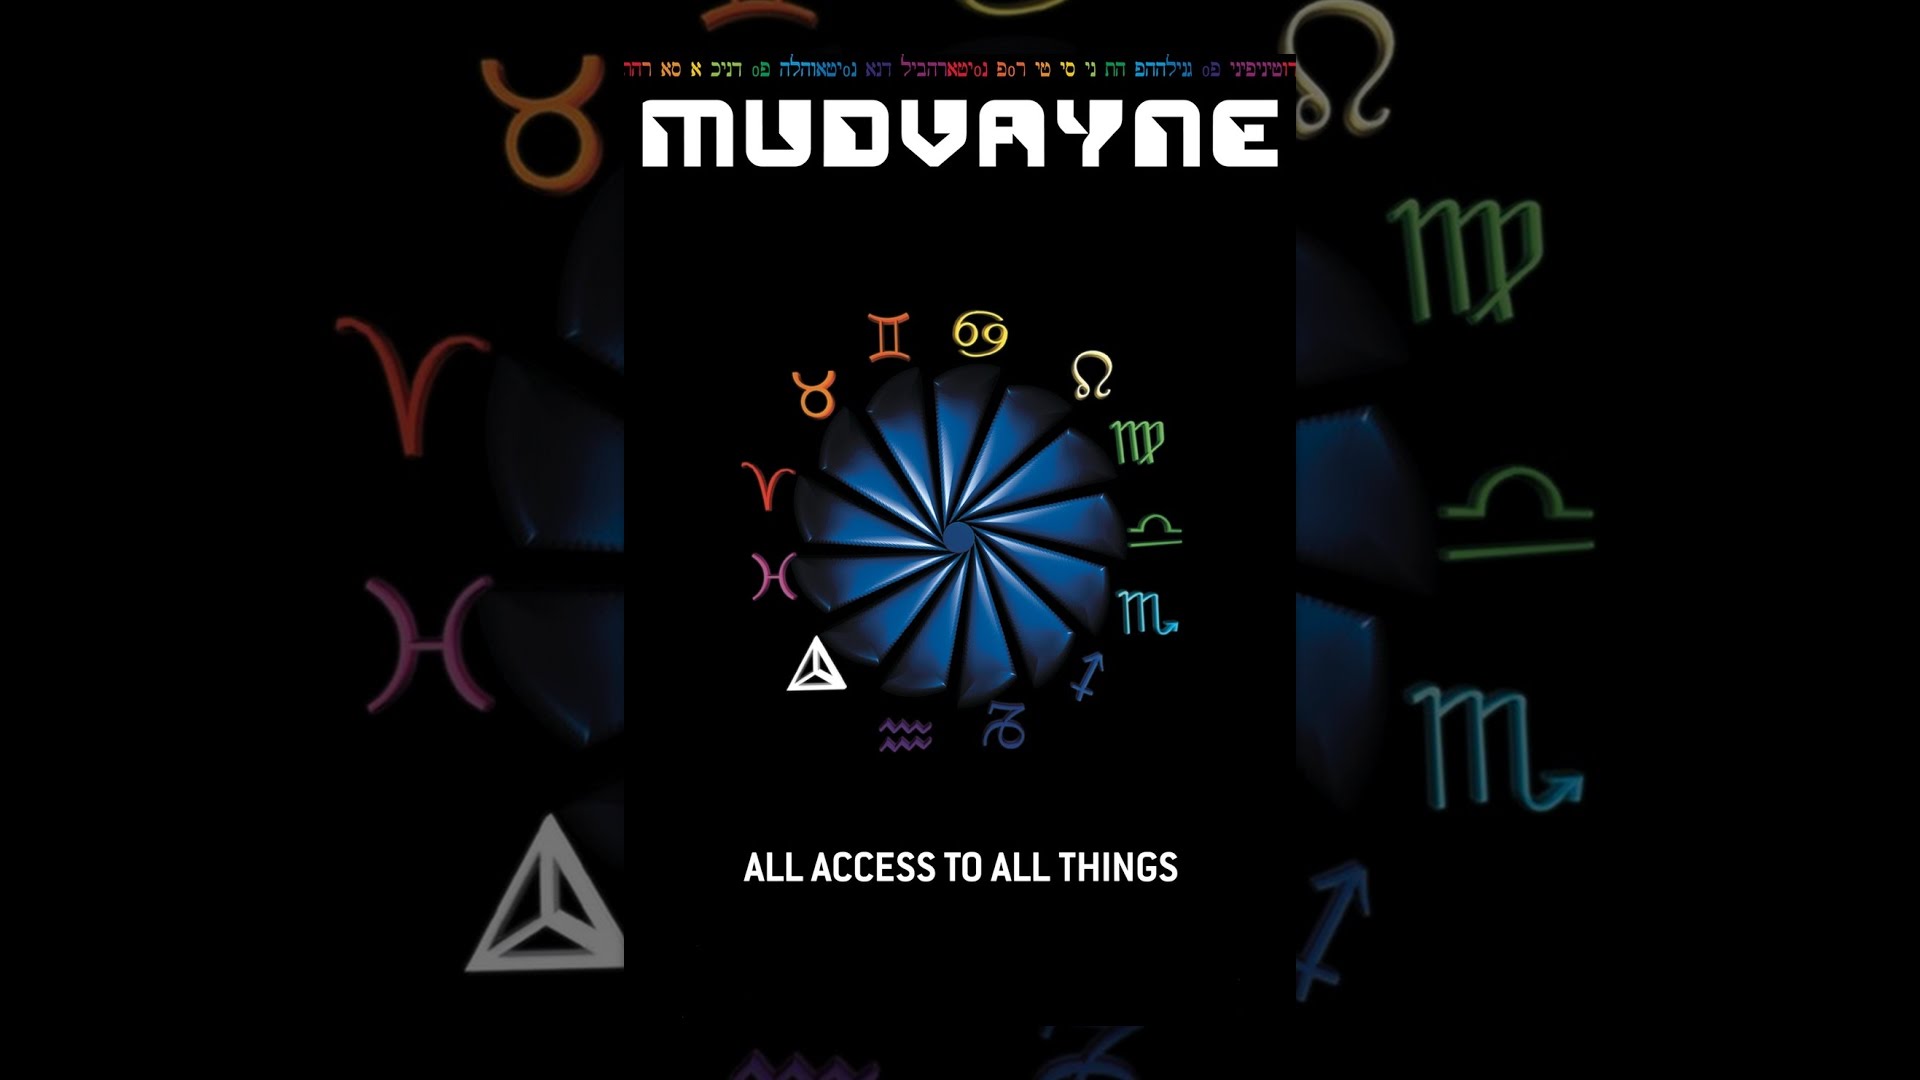 Mudvayne: All Access to All Things